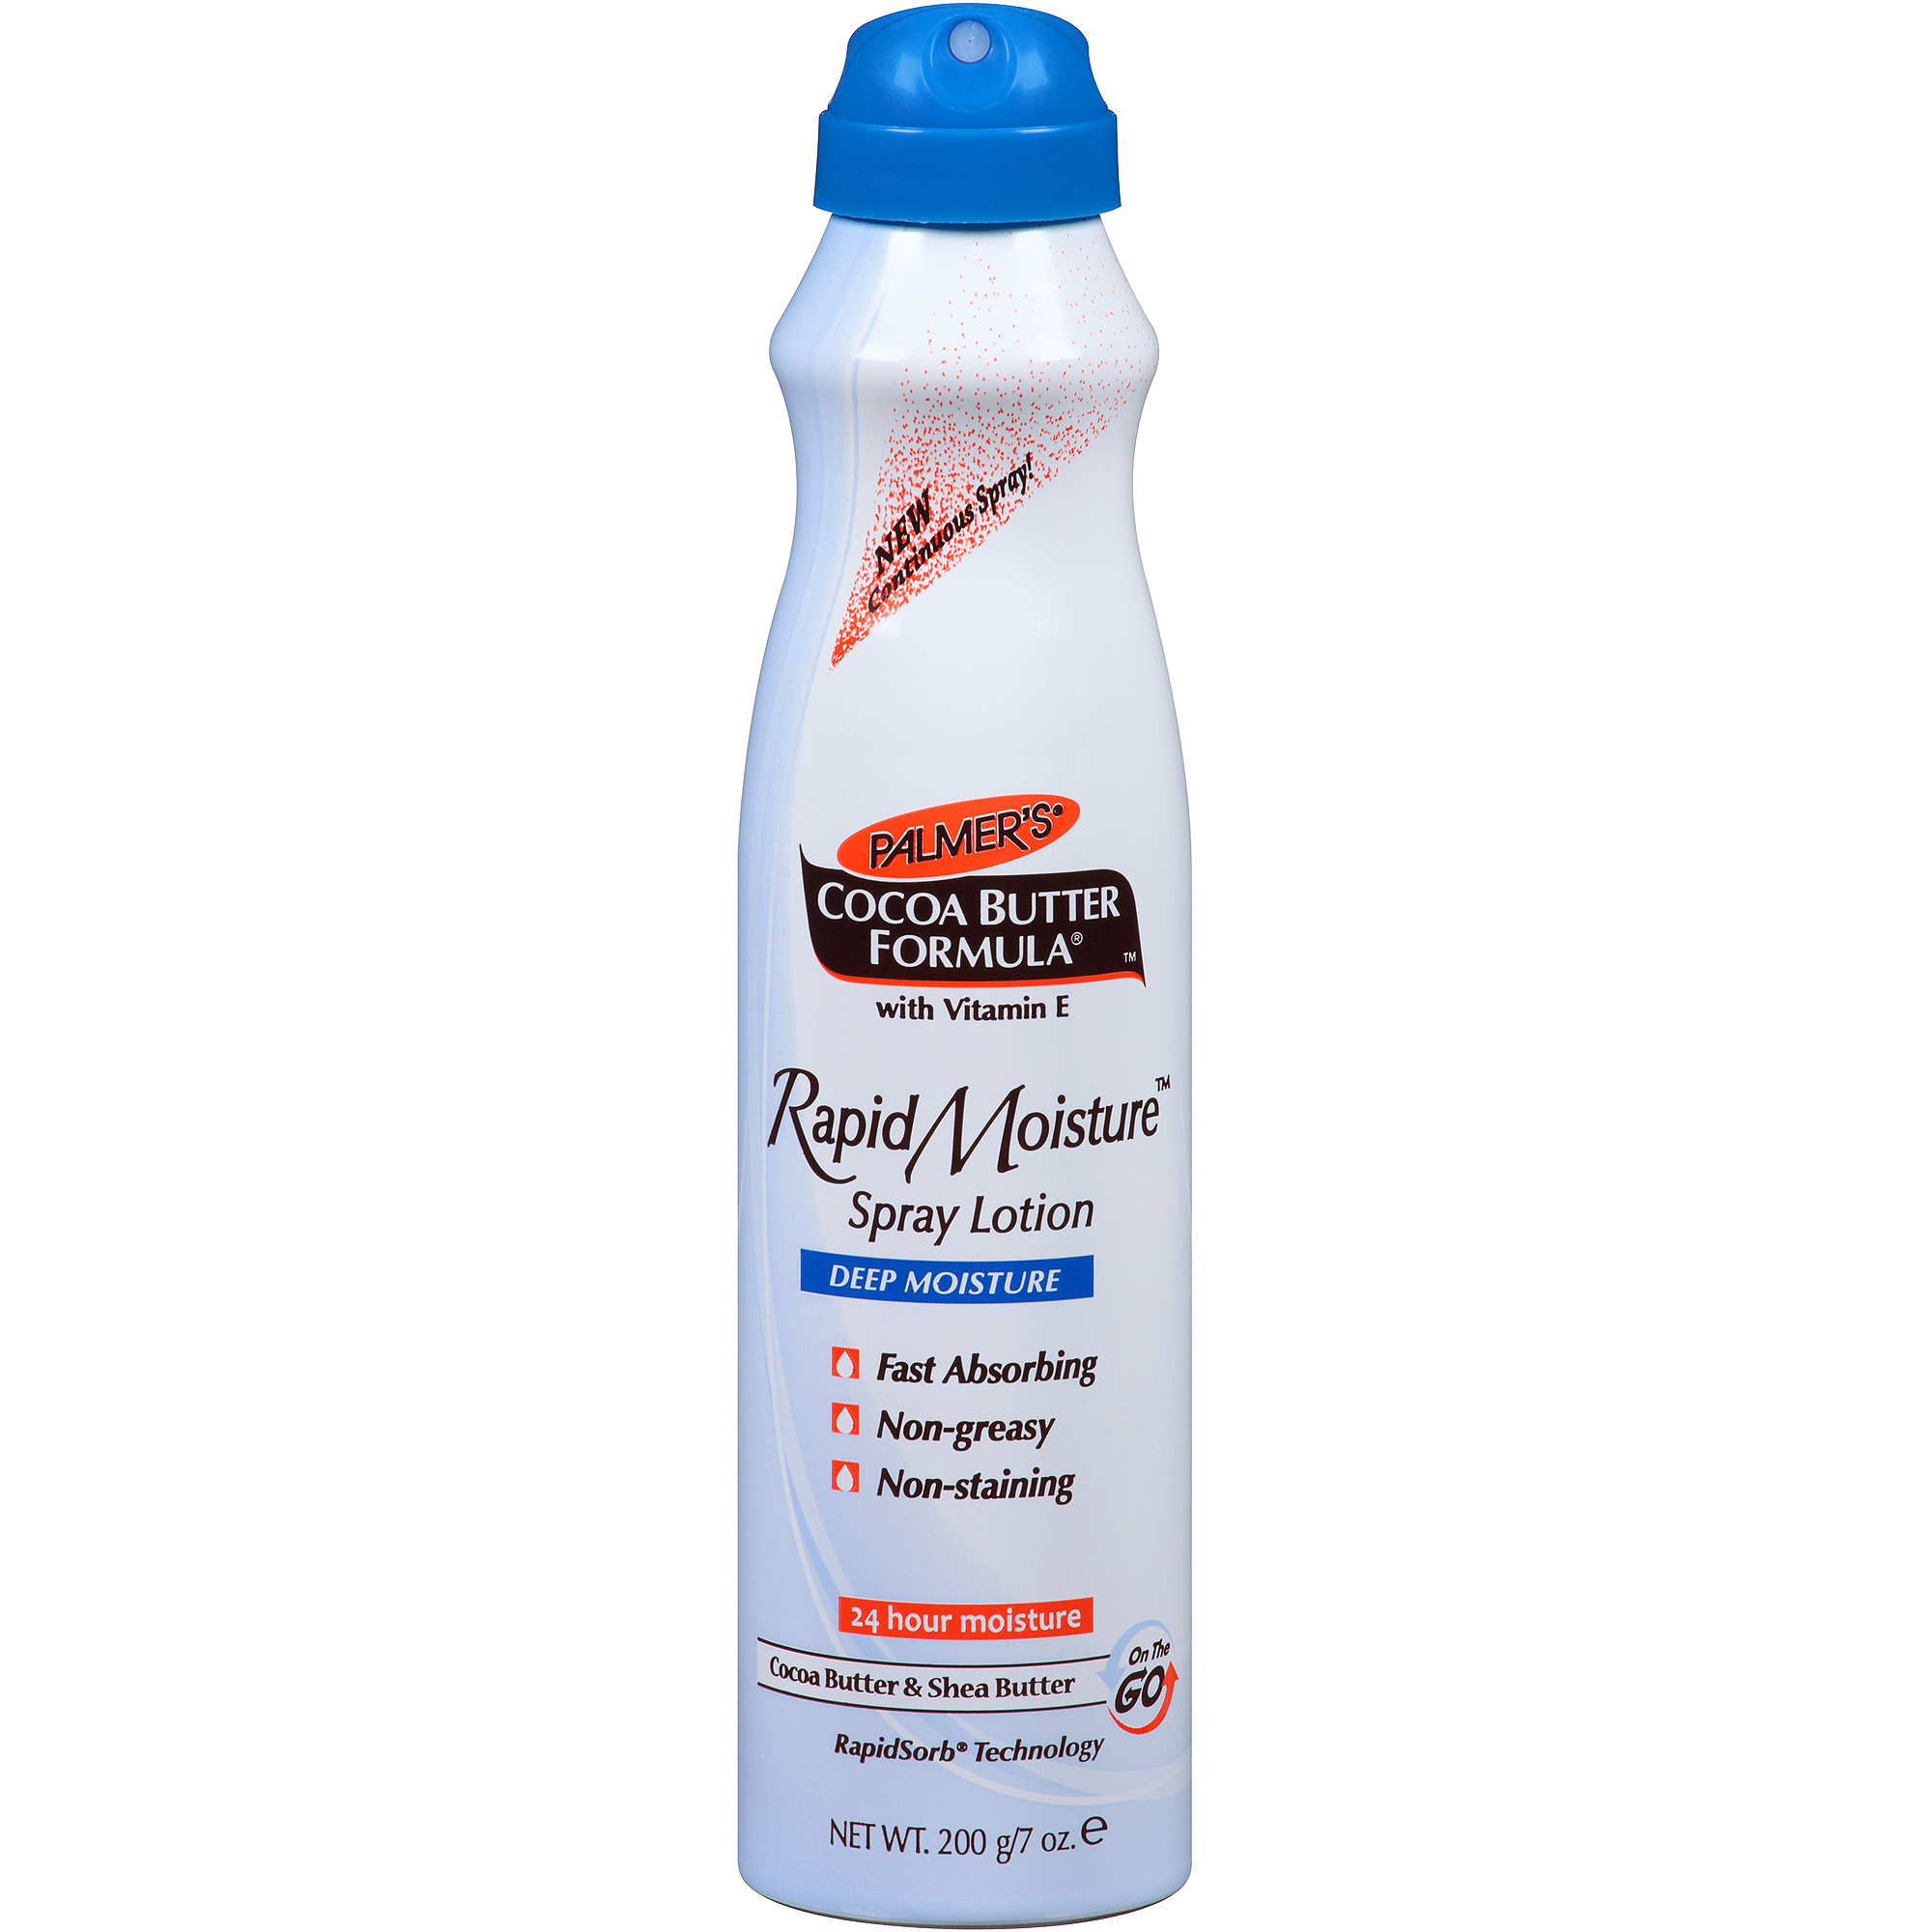 Palmer's® Cocoa Butter Formula® Rapid Moisture Spray Lotion, 7 oz - image 1 of 2